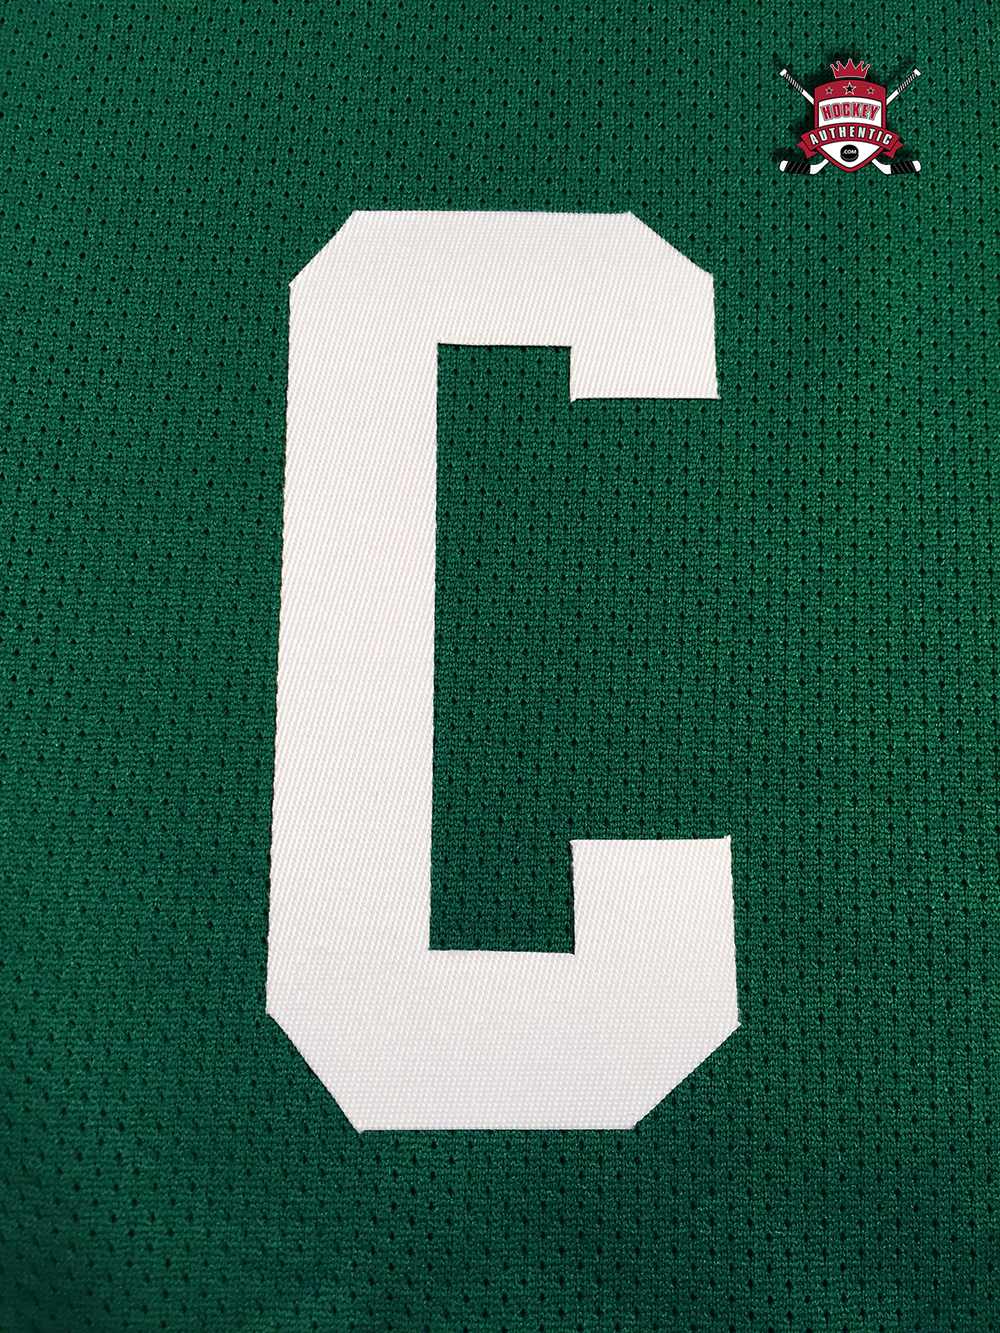 what is the c with stars on nfl jerseys